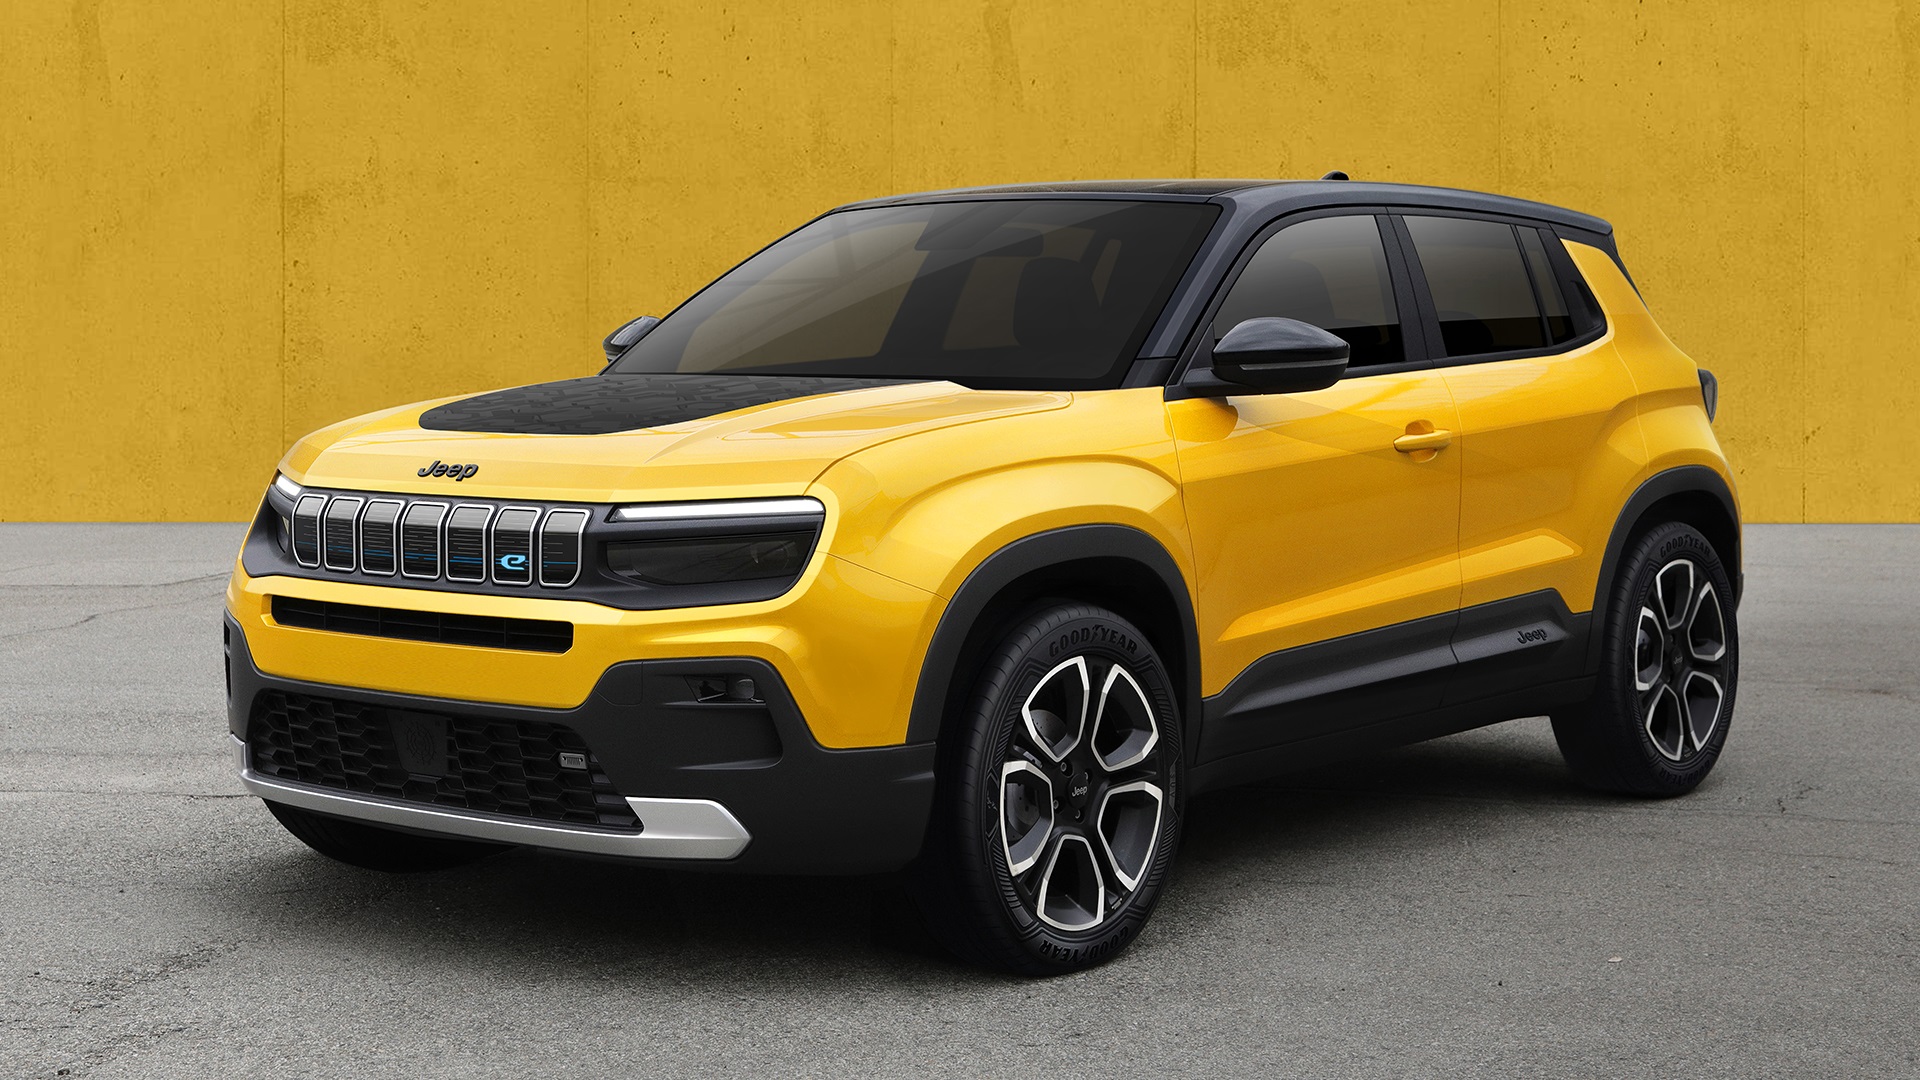 Jeep® brand reveals image of first-ever fully electric Jeep SUV